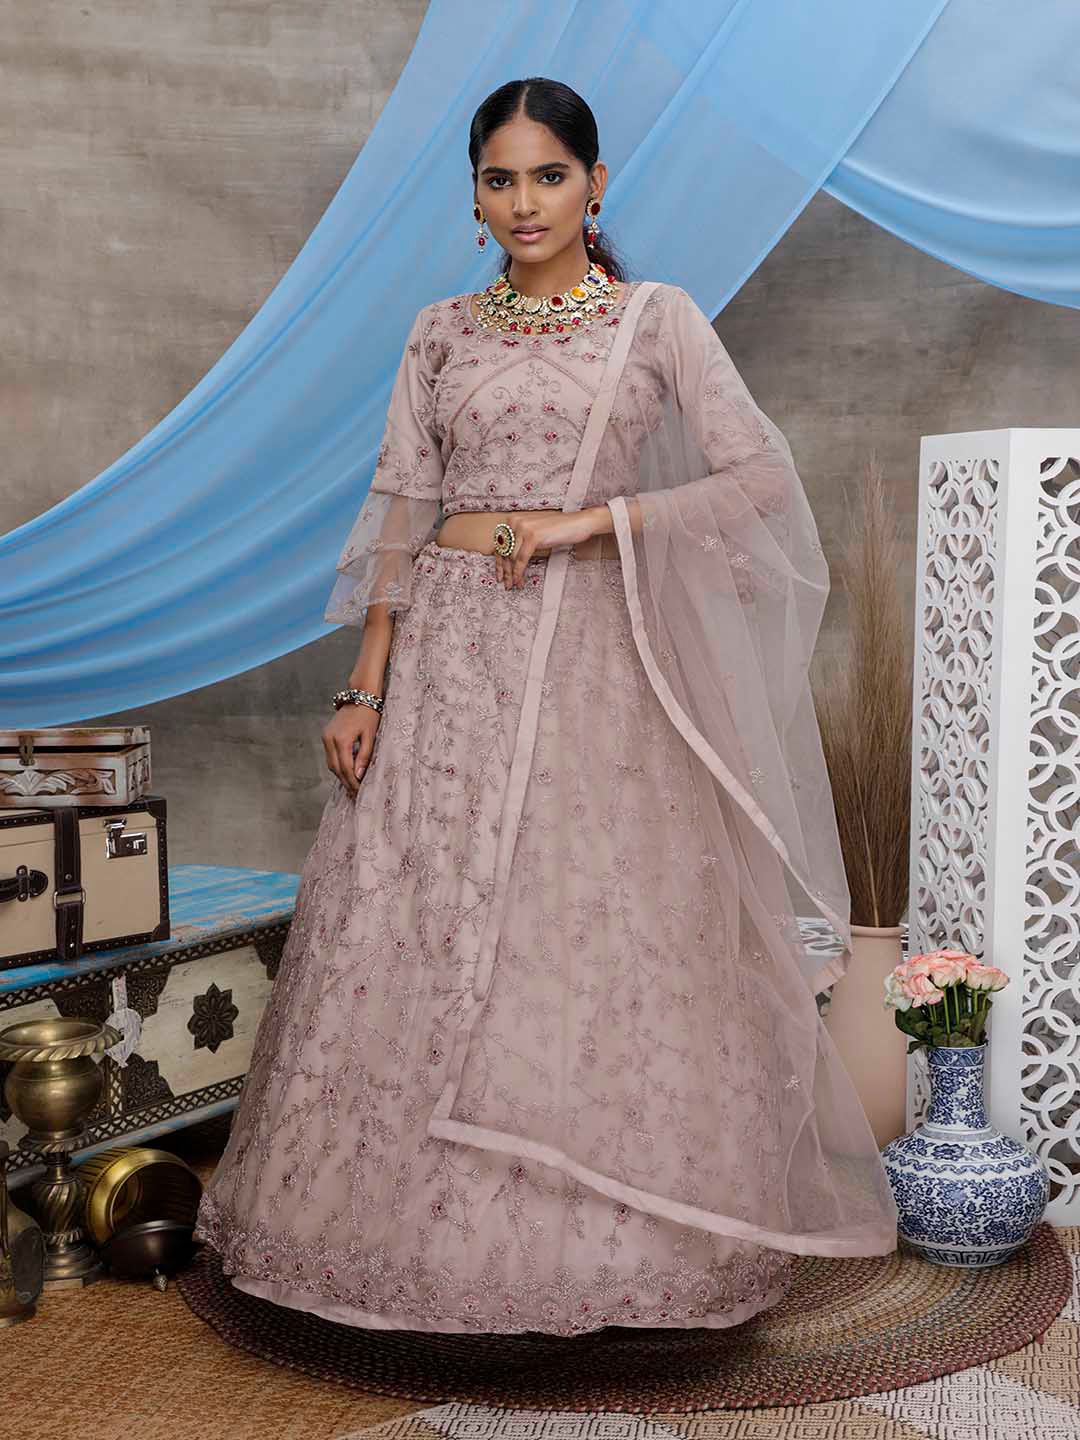 SHUBHKALA Embroidered Net Semi-Stitched Lehenga & Unstitched Blouse With Dupatta Price in India